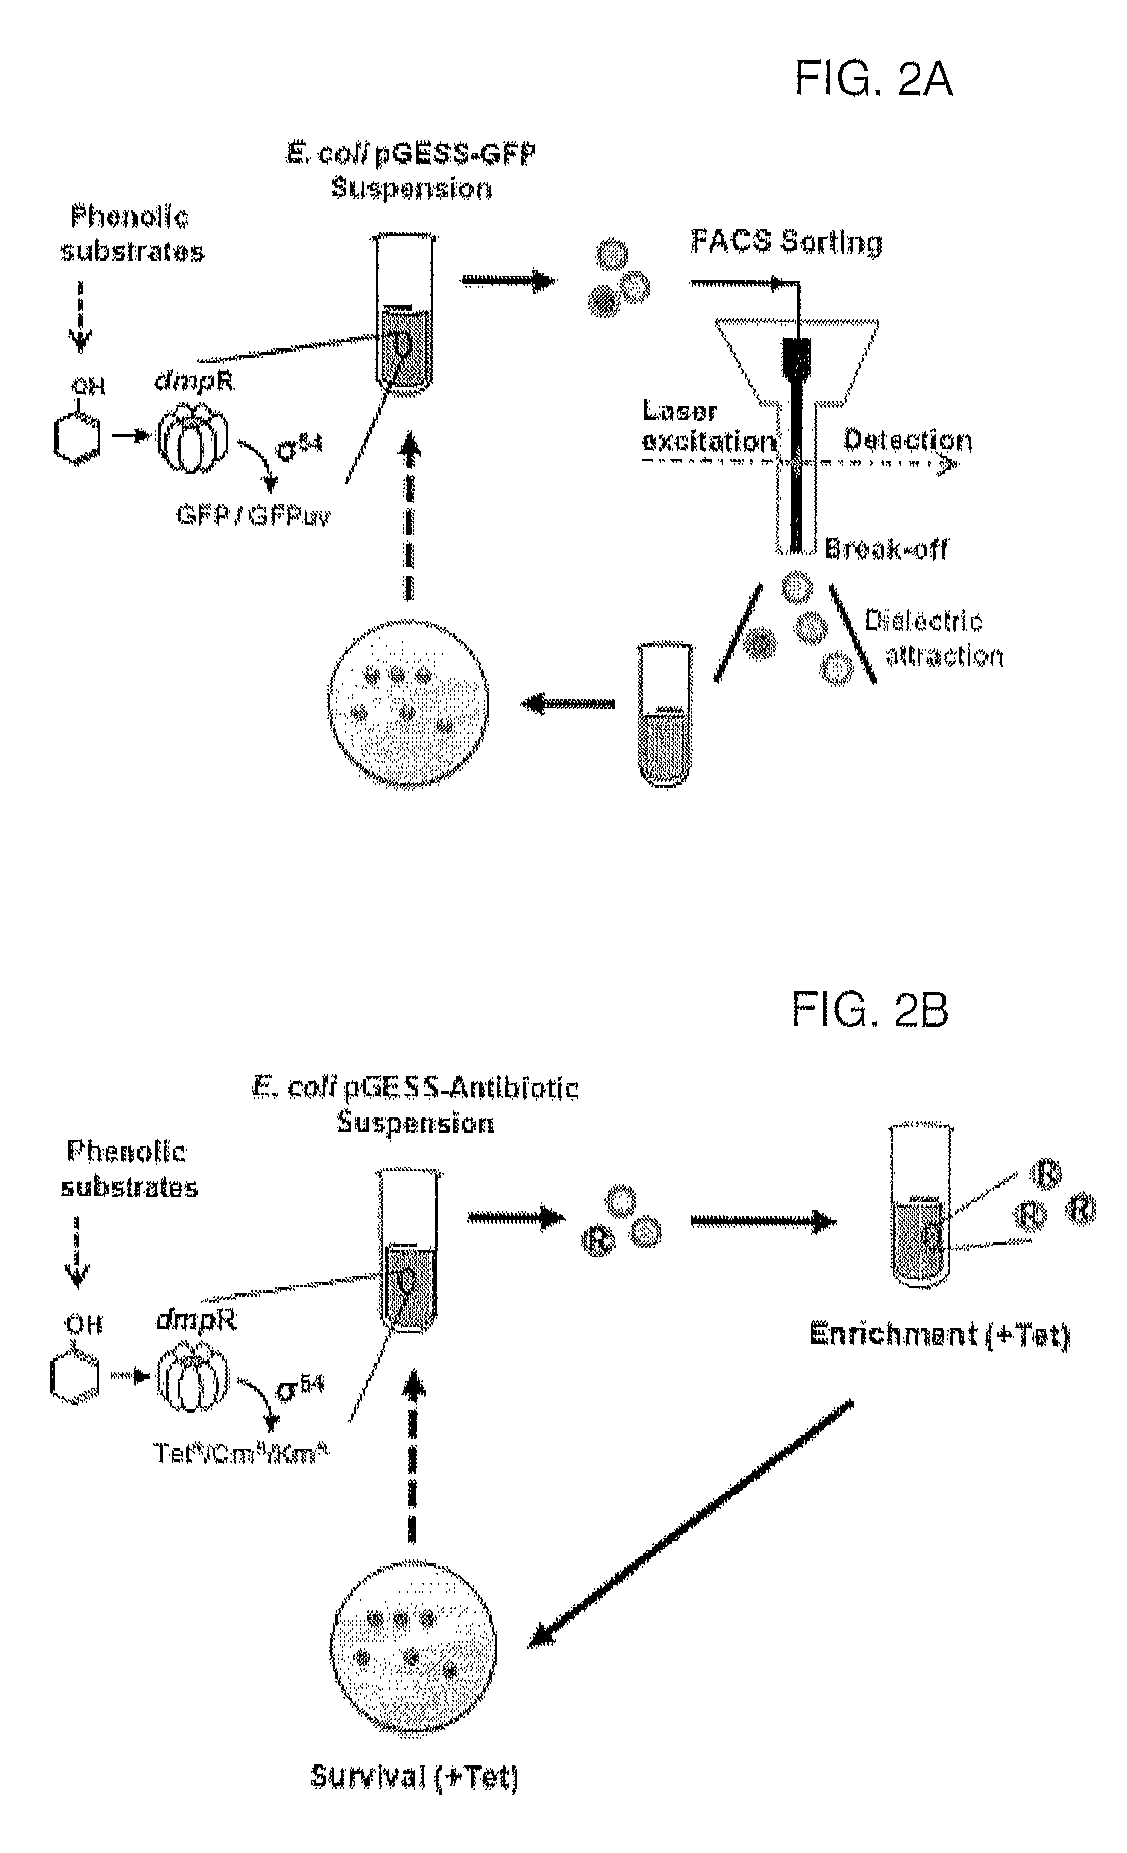 Method of screening and quantifying various enzymatic activities using artificial genetic circuits